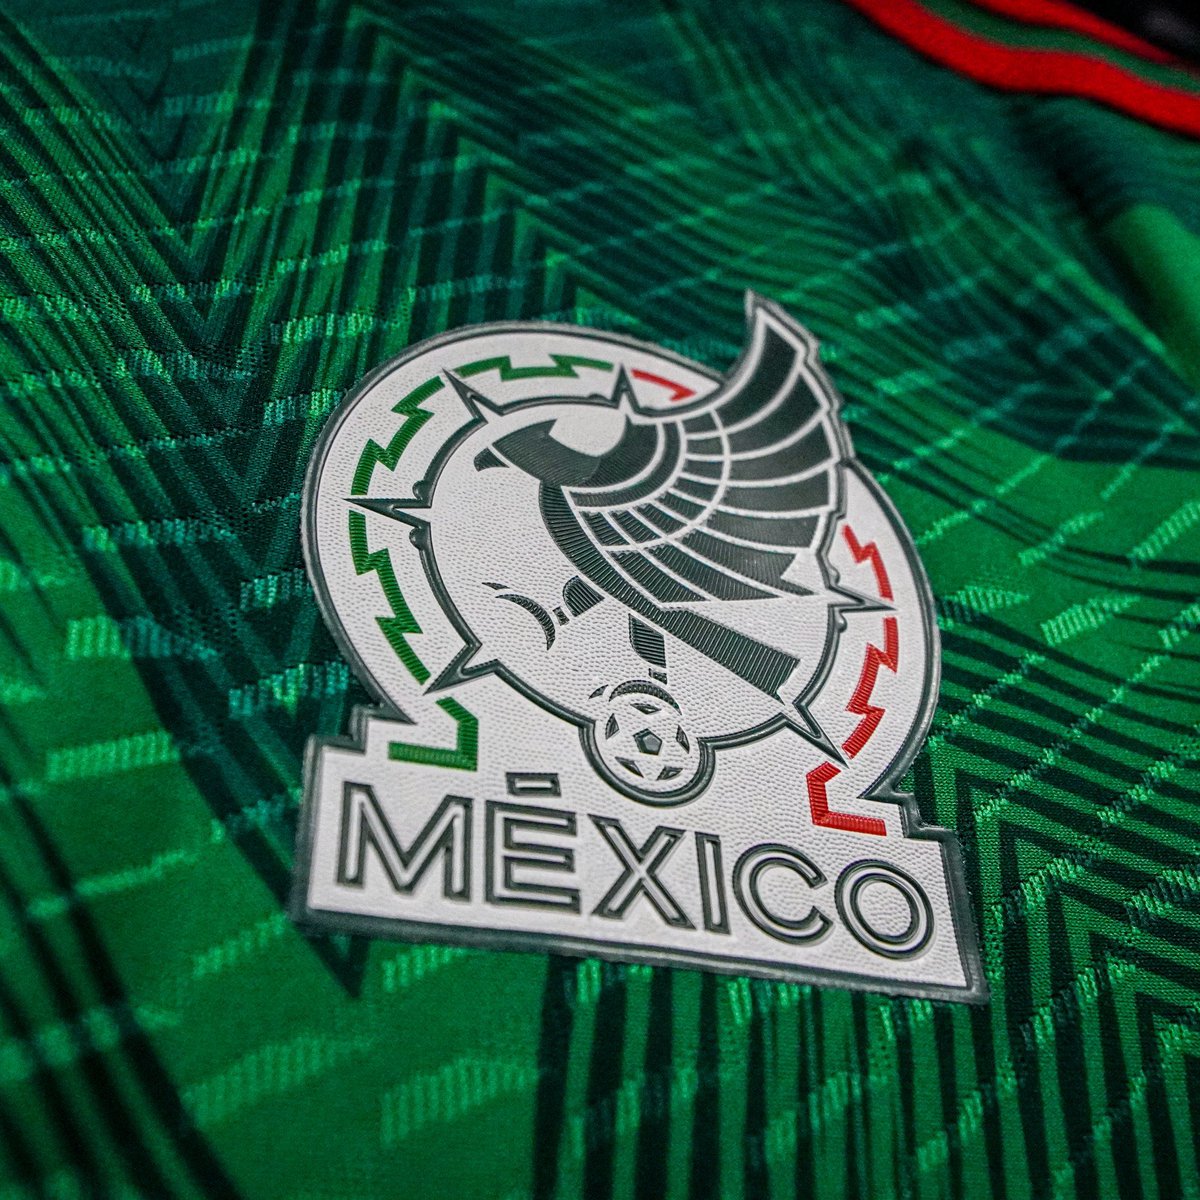 Mexico has been shit since they switched over to this pollo desplumado ass logo…